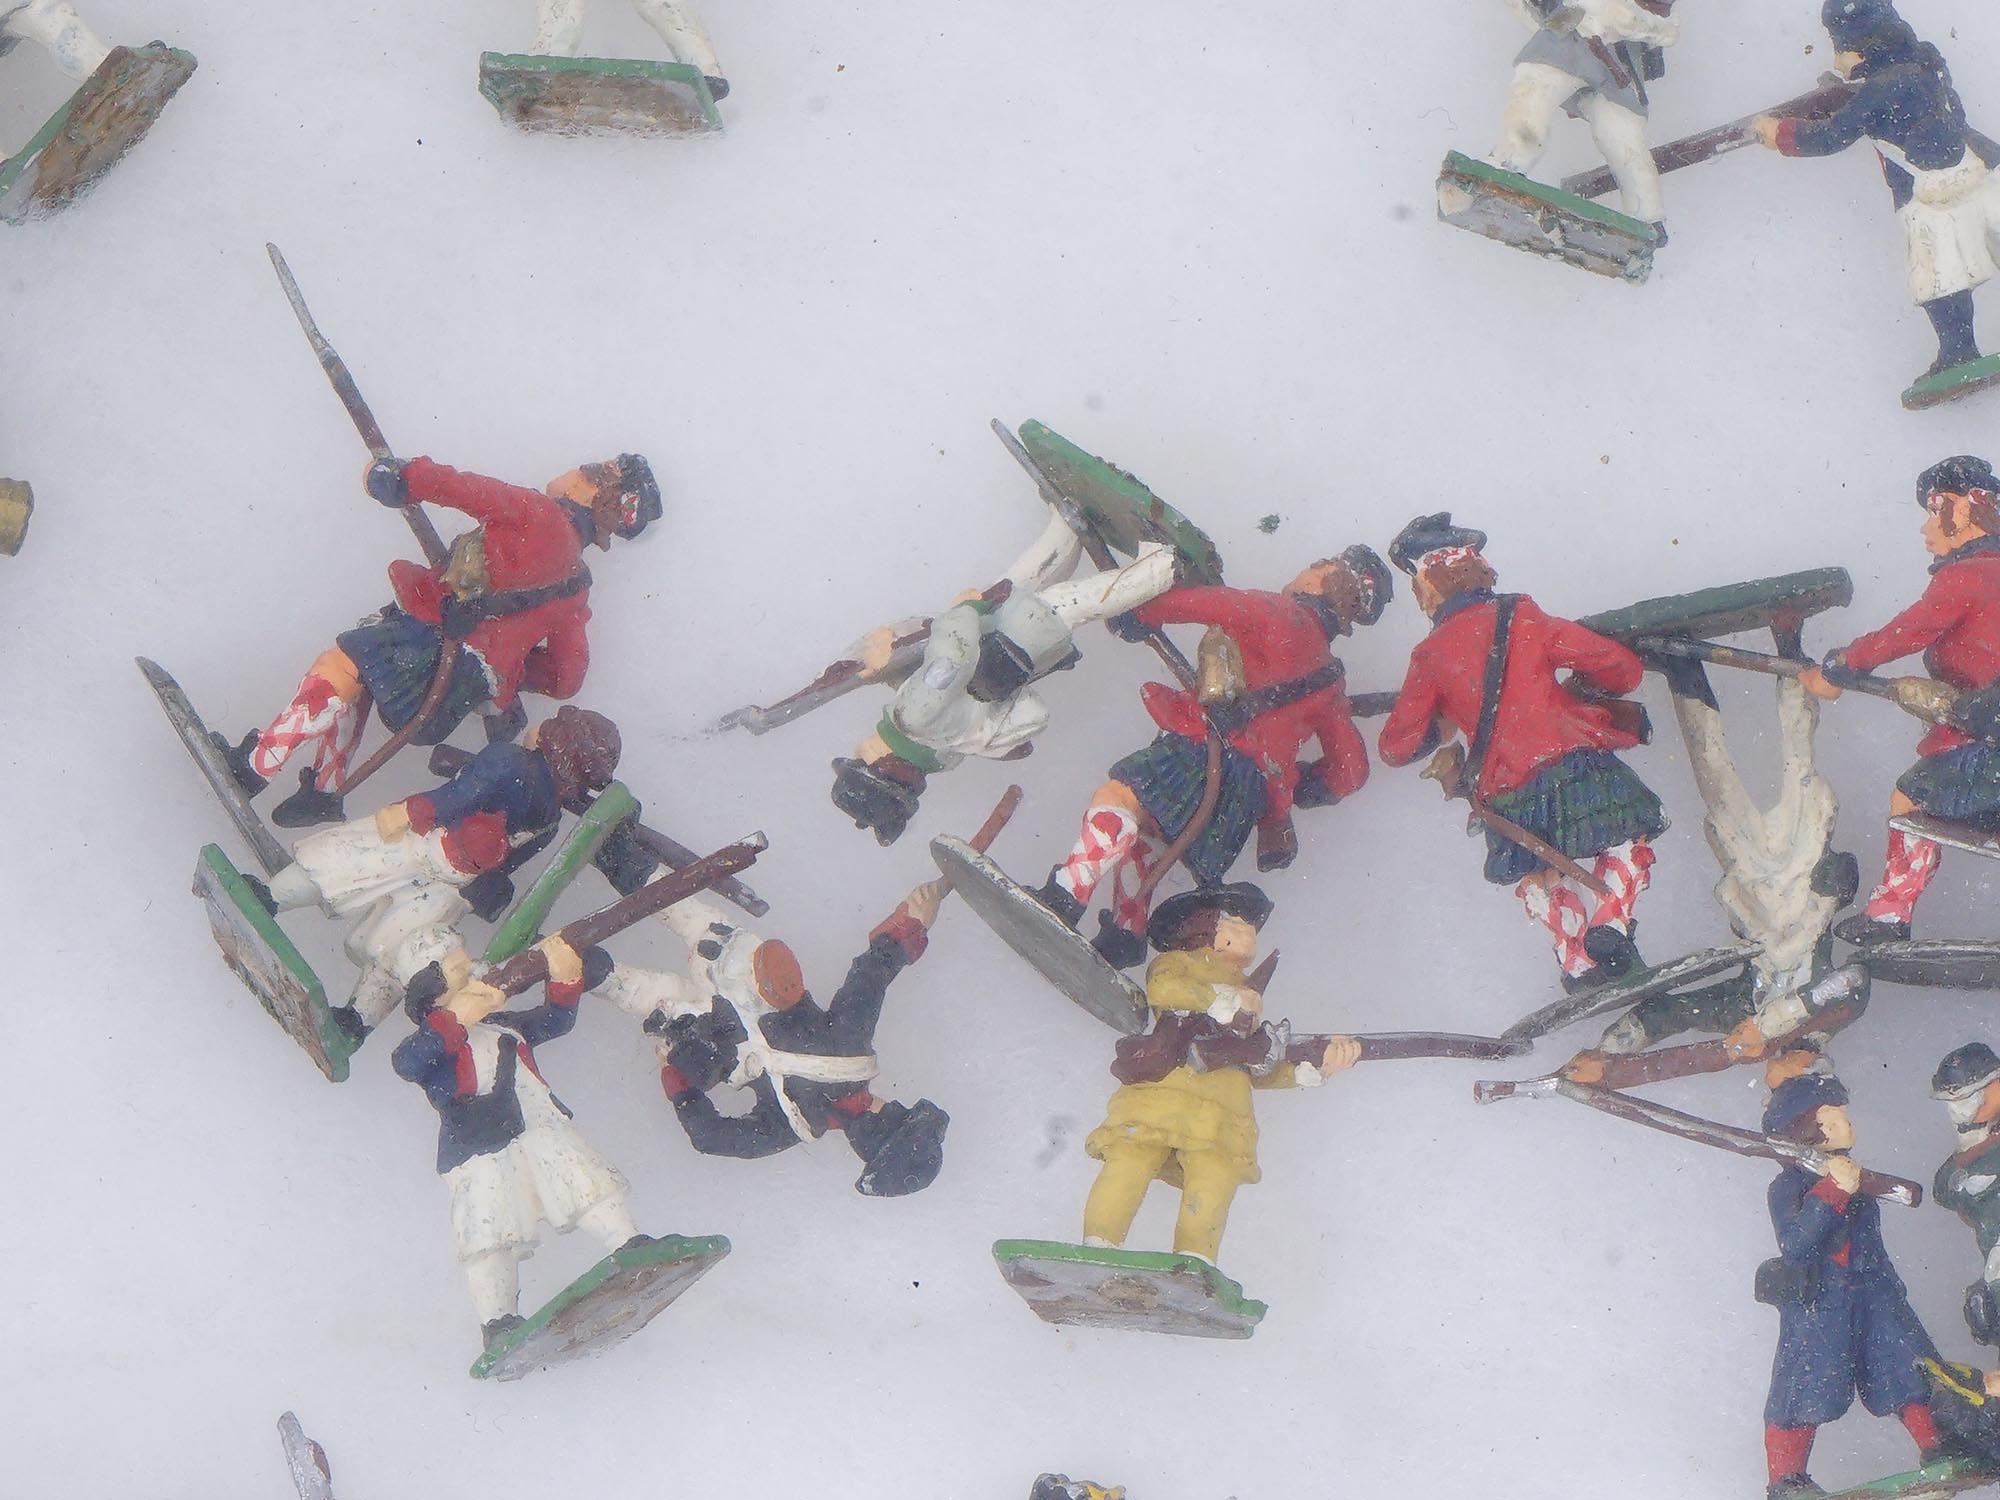 ANTIQUE MILITARY TOY SOLDIERS 1776 AMERICAN REVOLUTION PIC-3